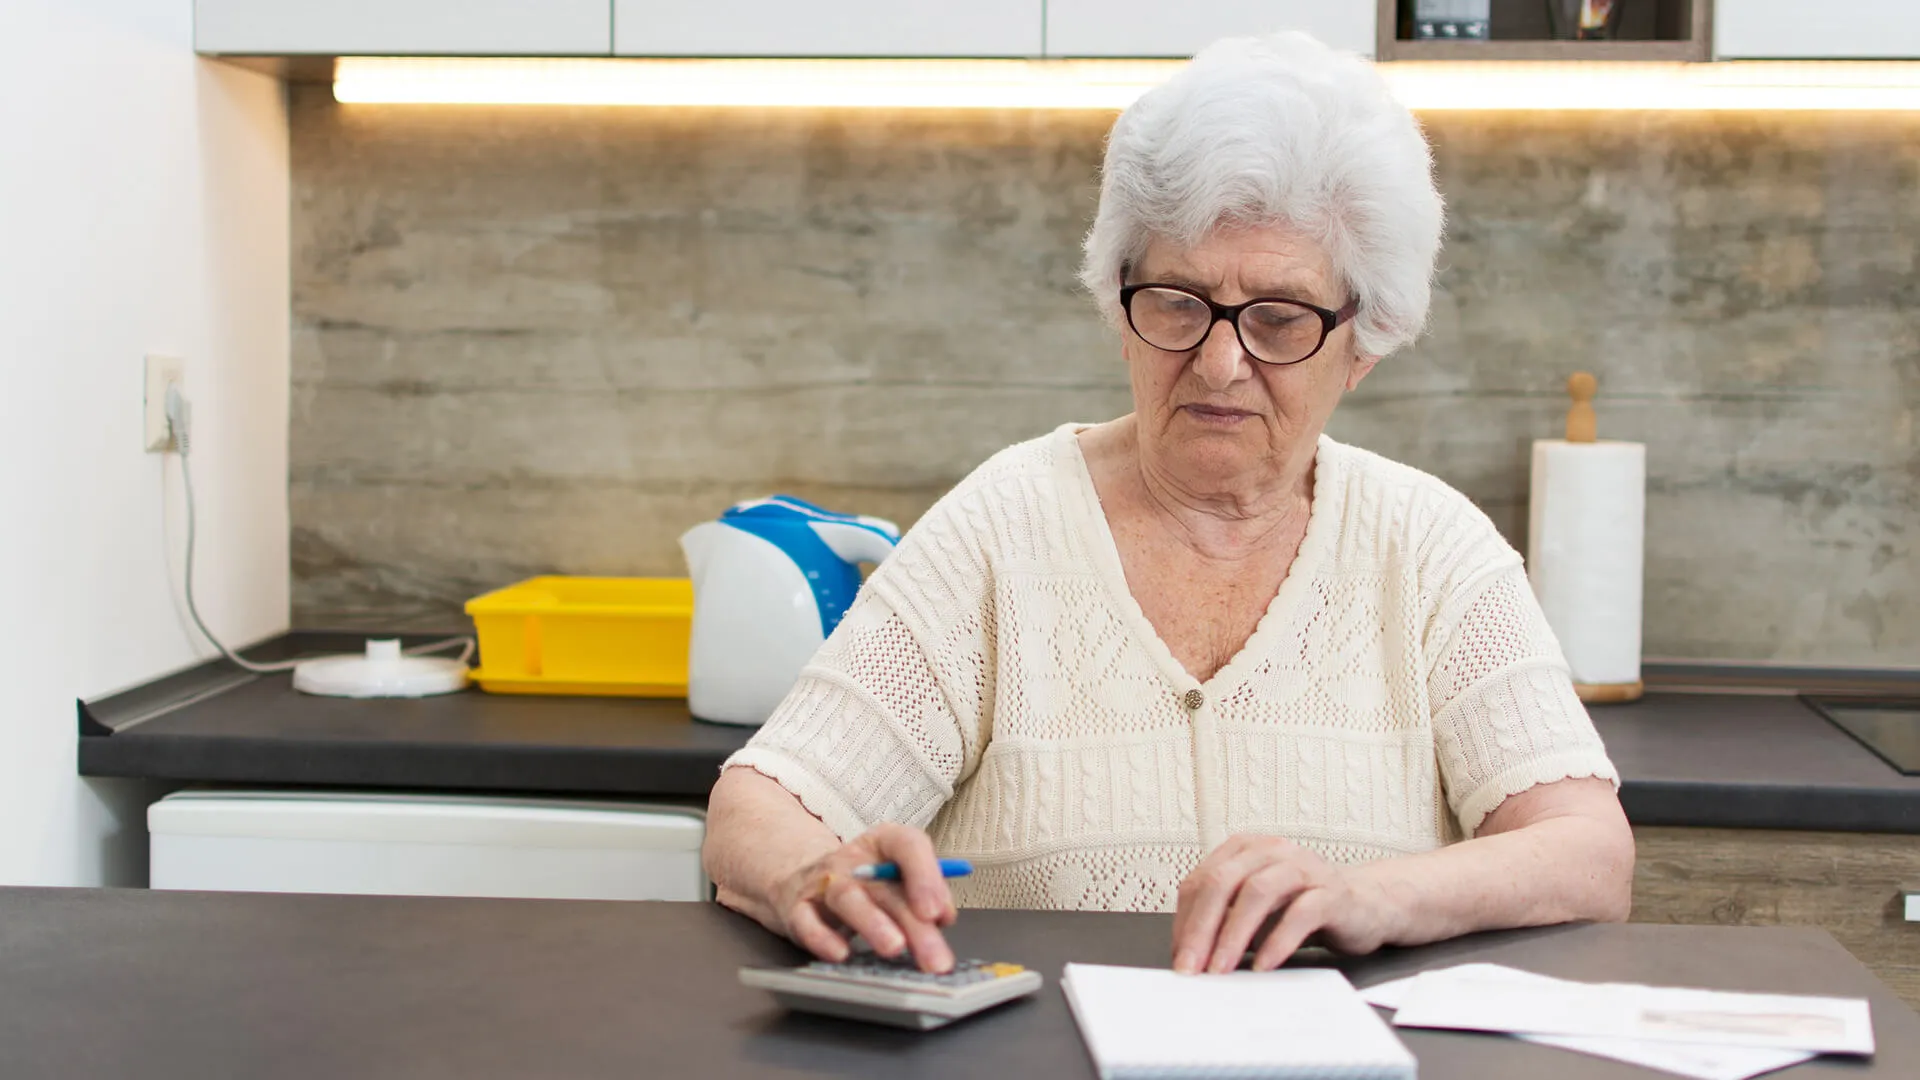 Elderly woman in kitchen calculating a budget